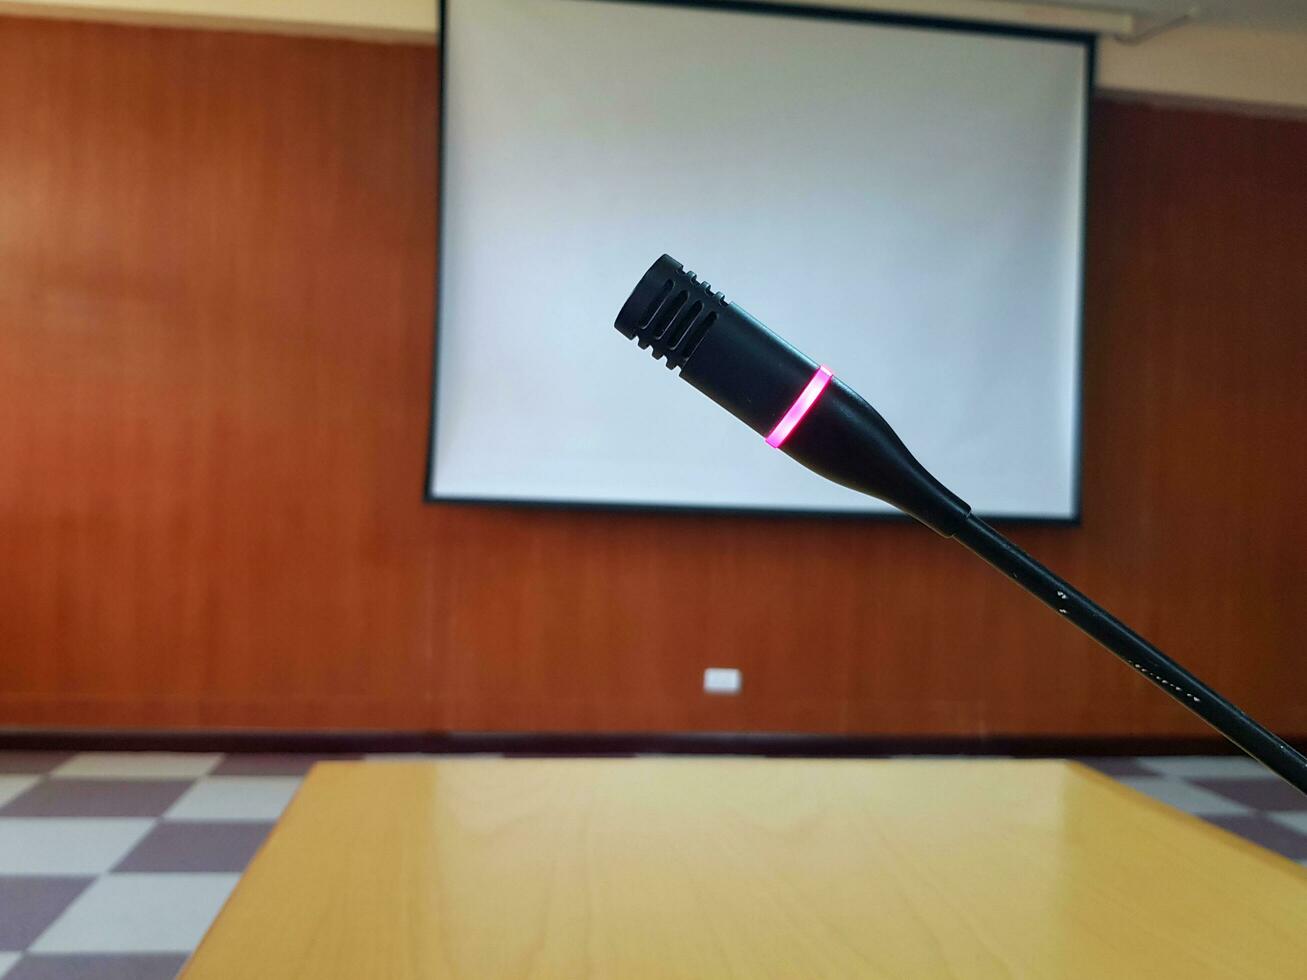 Black Microphone with red light flashing when push button on wooden desk for talking or presentation in conference or meeting room with white projector board blurred background. Device and Tool photo